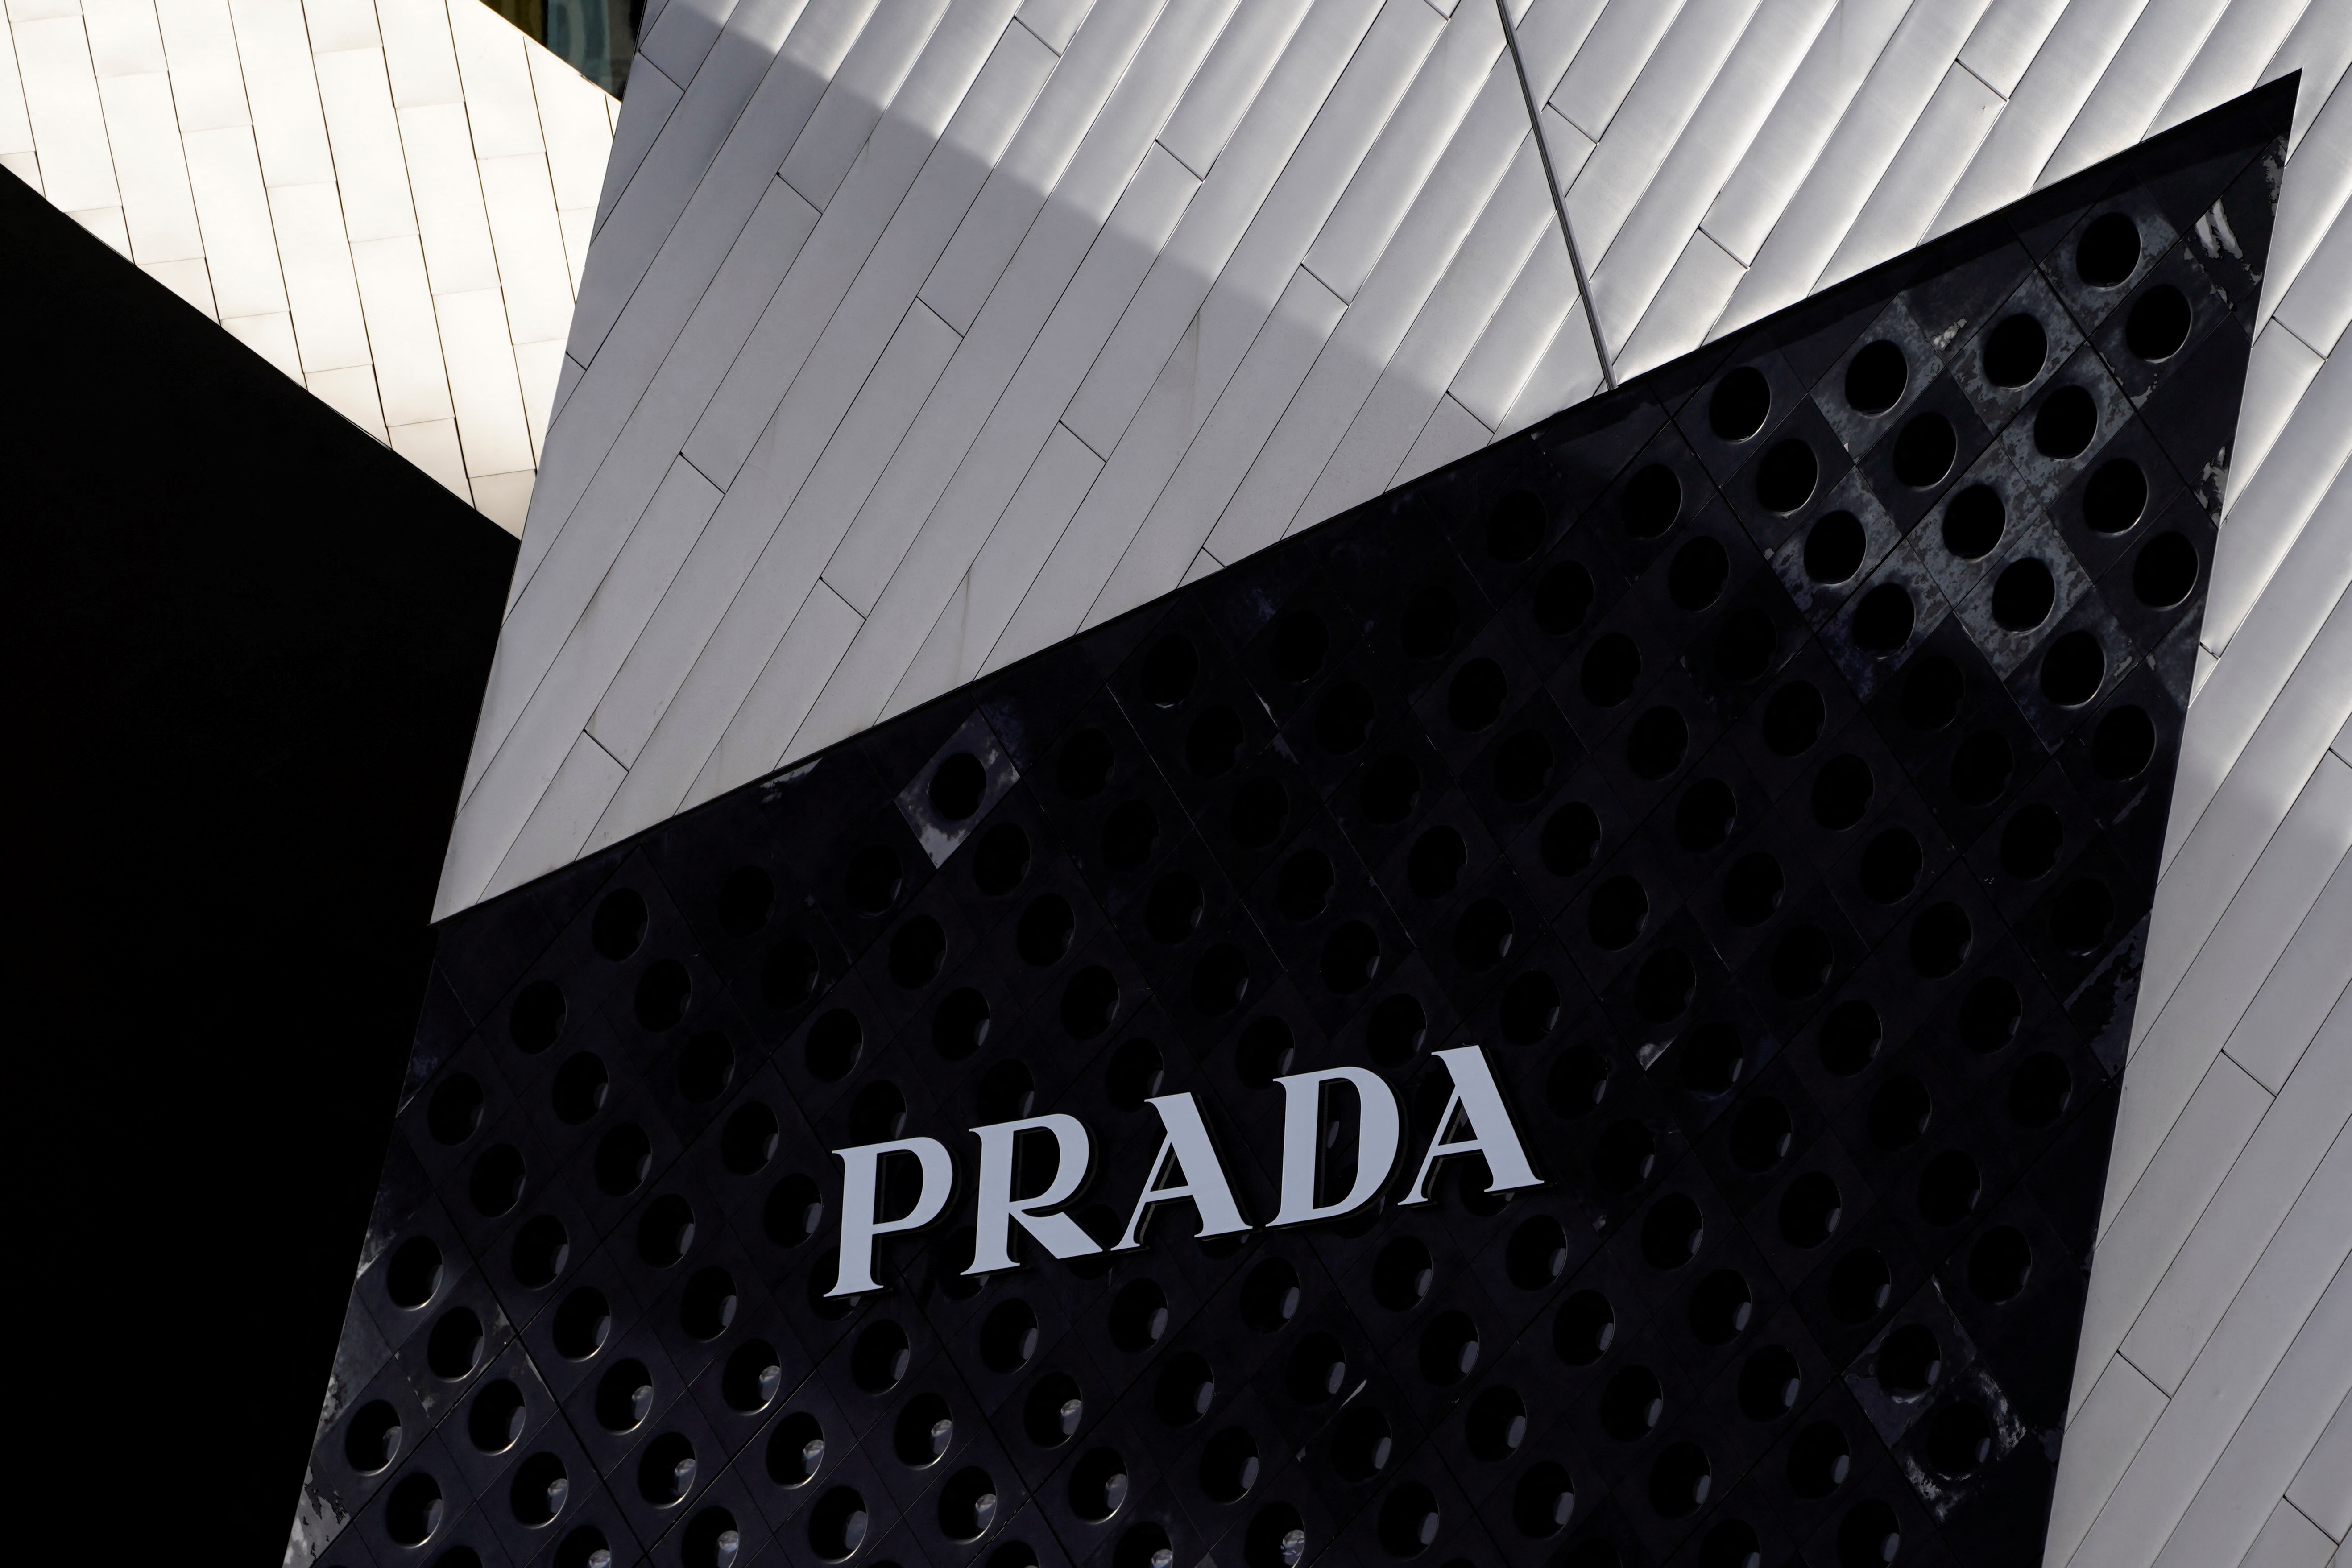 Prada turns to ex-Luxottica CEO Guerra to ease succession - source